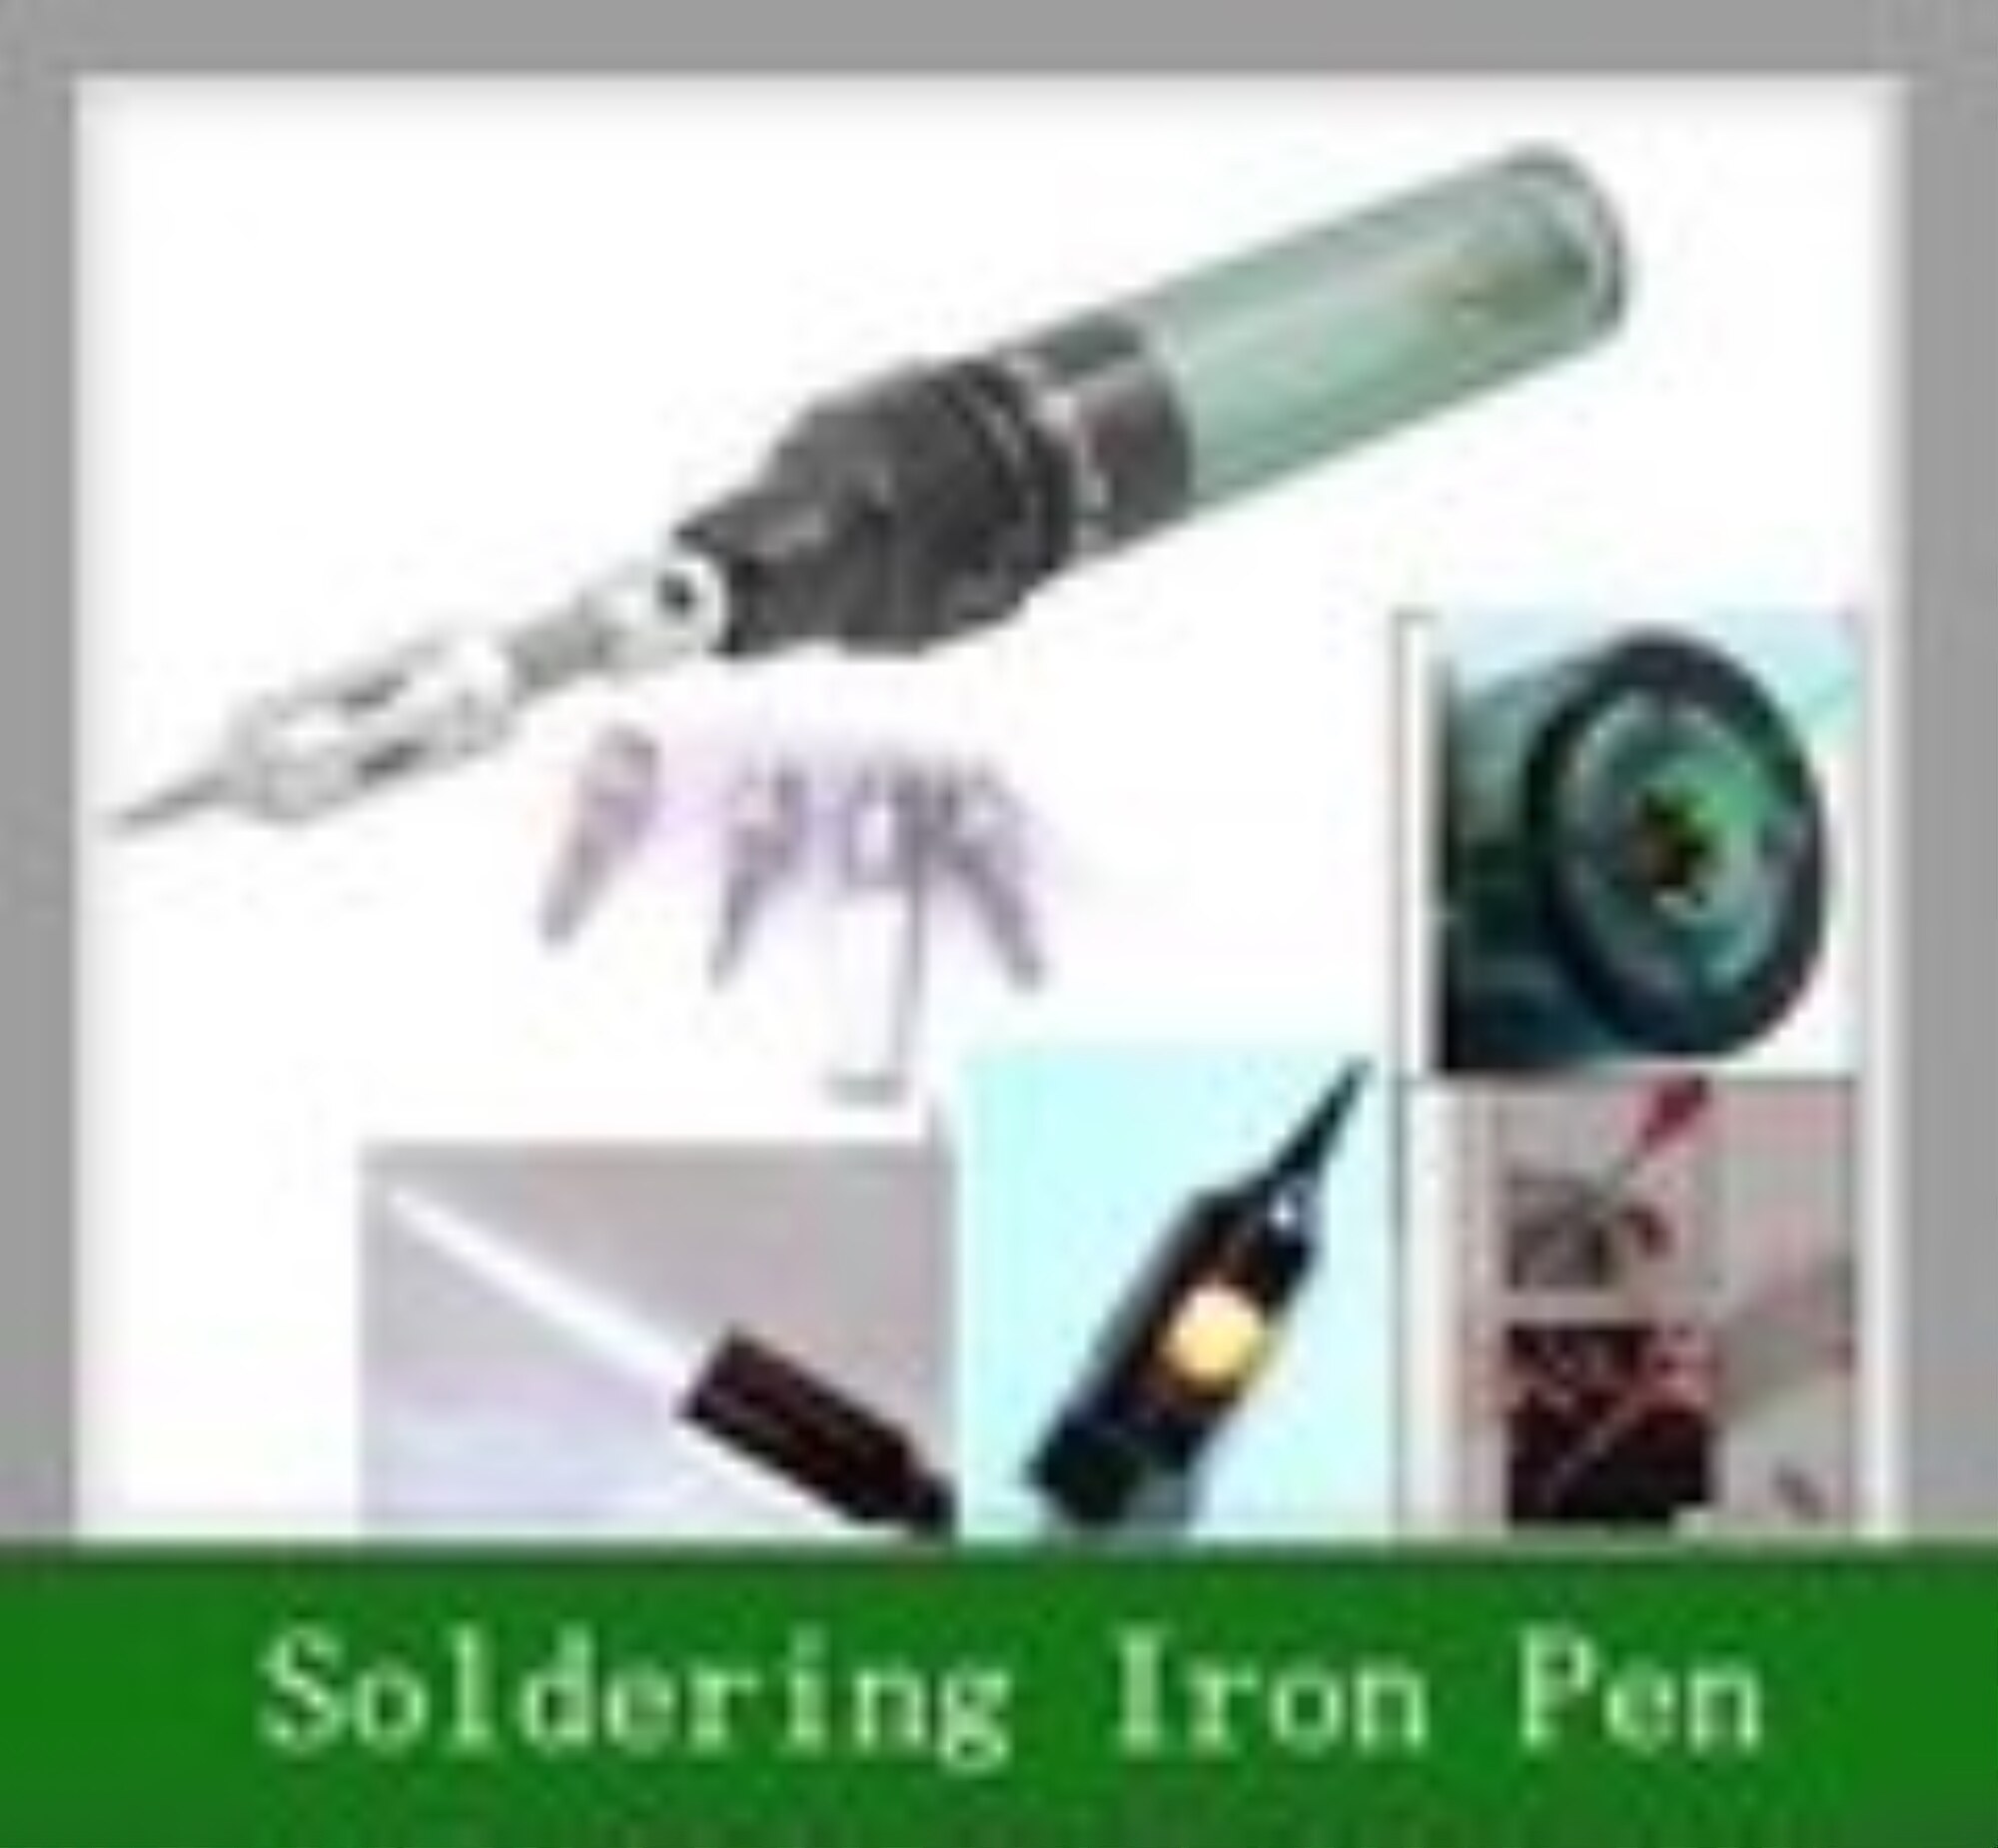 2-IN-1-Aerated-Flame-Butane-Gas-Soldering-Iron-Pen-Flame-Torch-Tool-4PCS-Tips.jpg_120x120.jpg